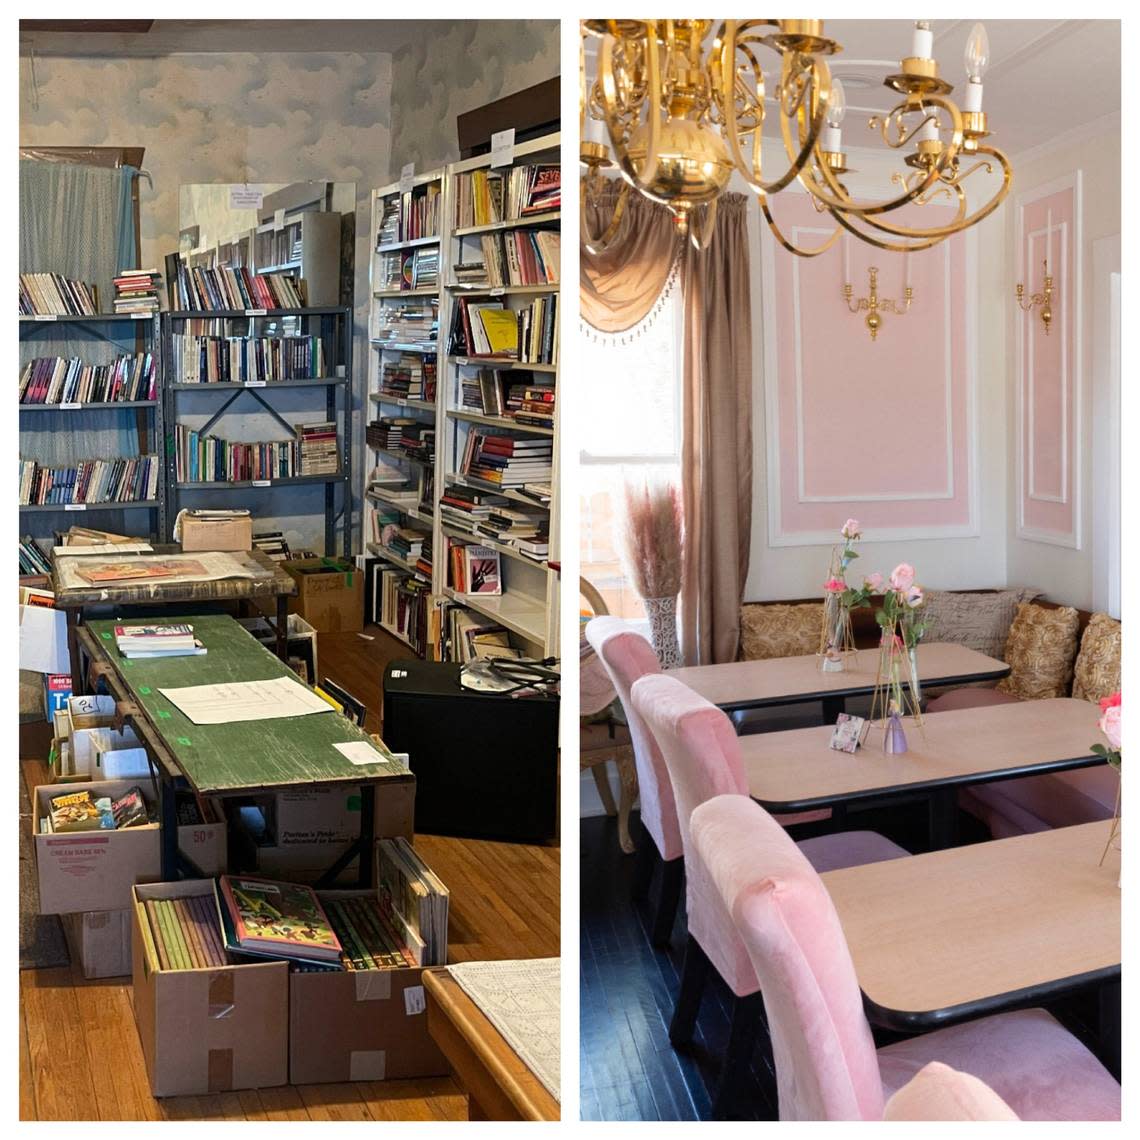 Before-and-after: Mariama Beemer transformed a shabby abandoned house on Victor Place into an elegant tea room.